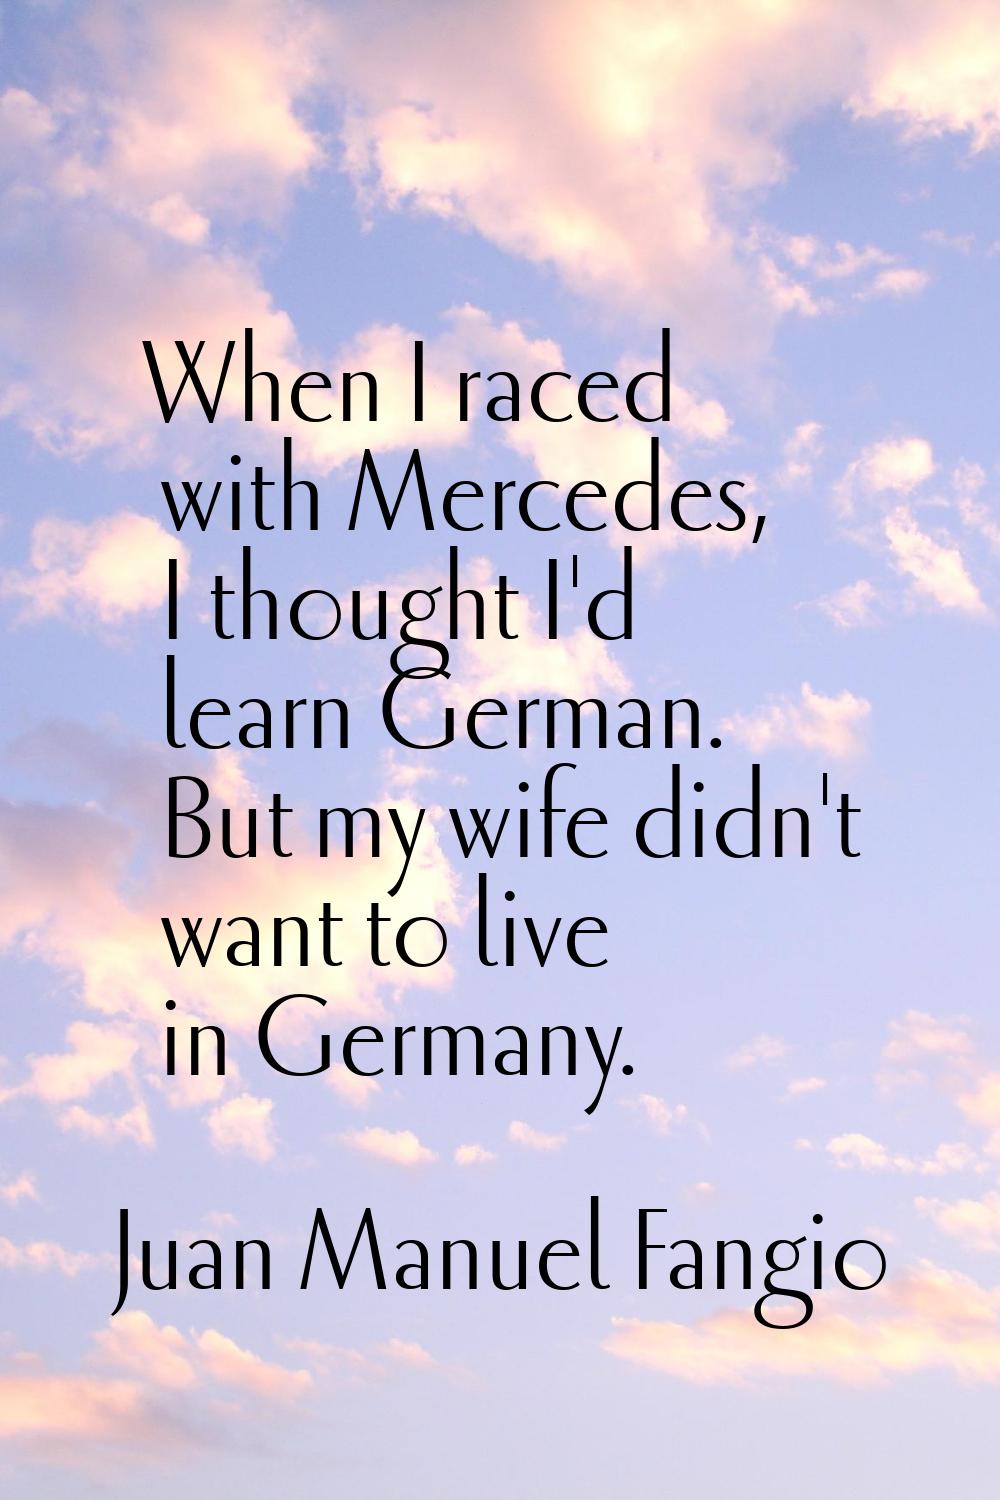 When I raced with Mercedes, I thought I'd learn German. But my wife didn't want to live in Germany.